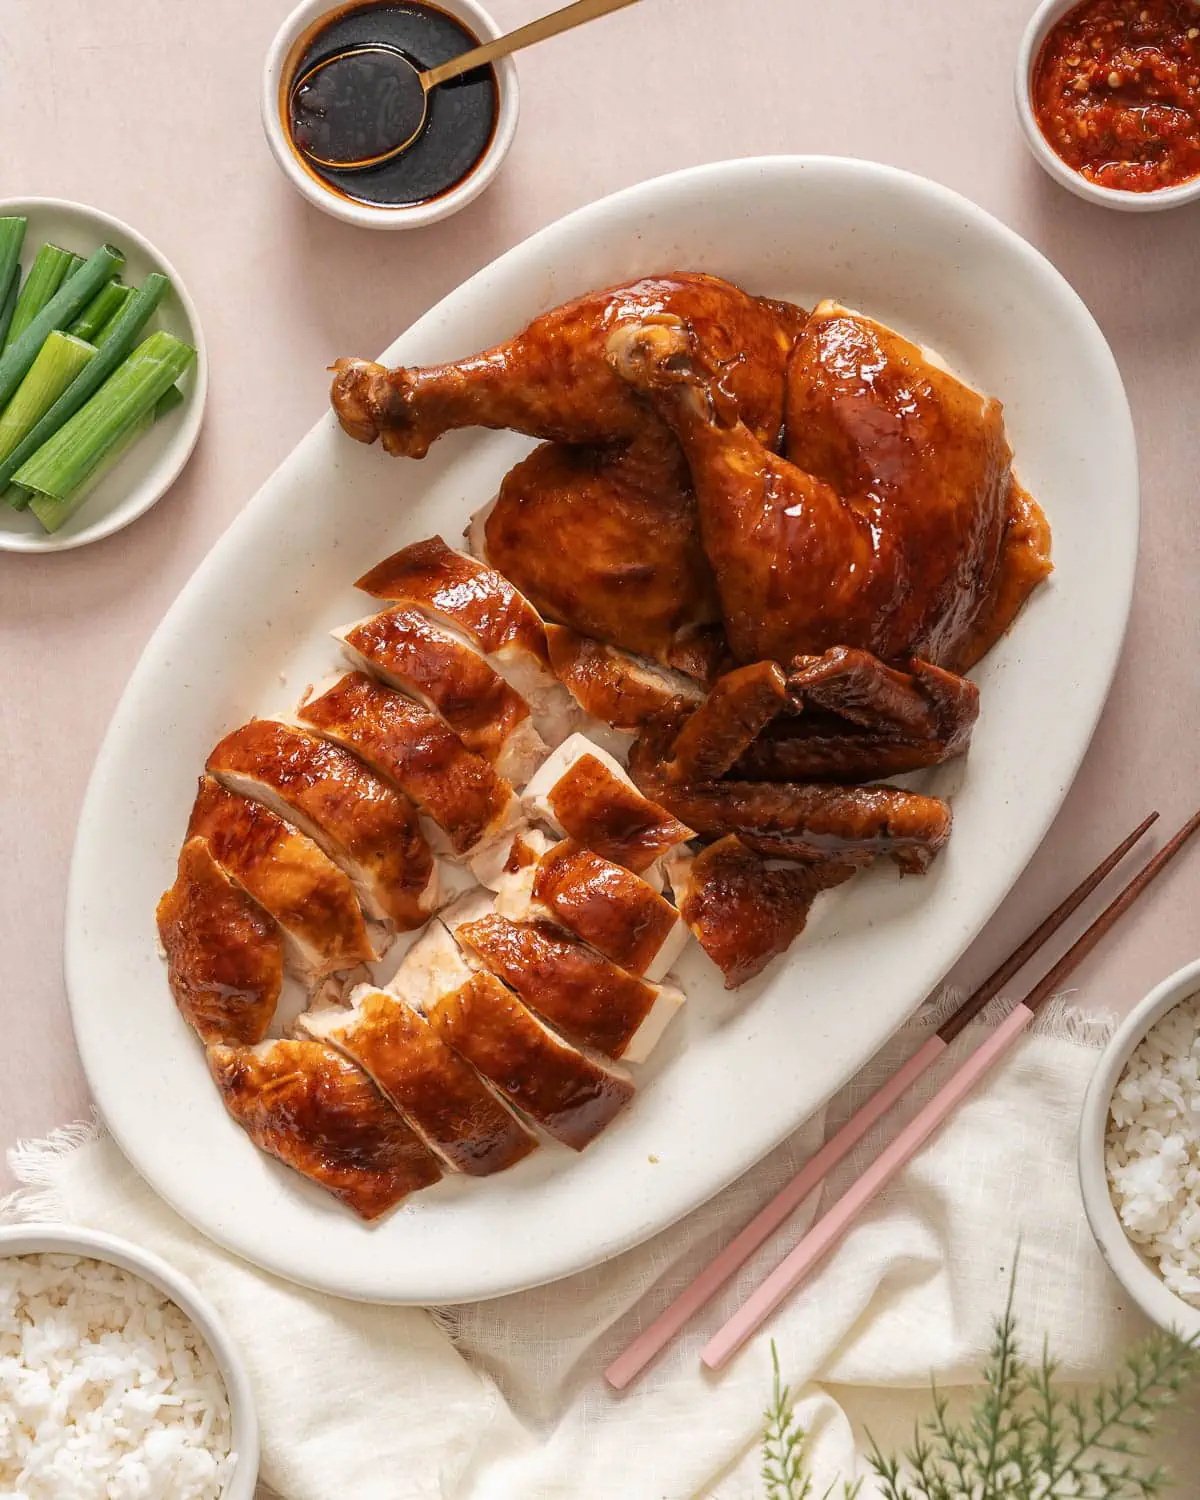 A top down view of a carved soy sauce chicken with sides near by.